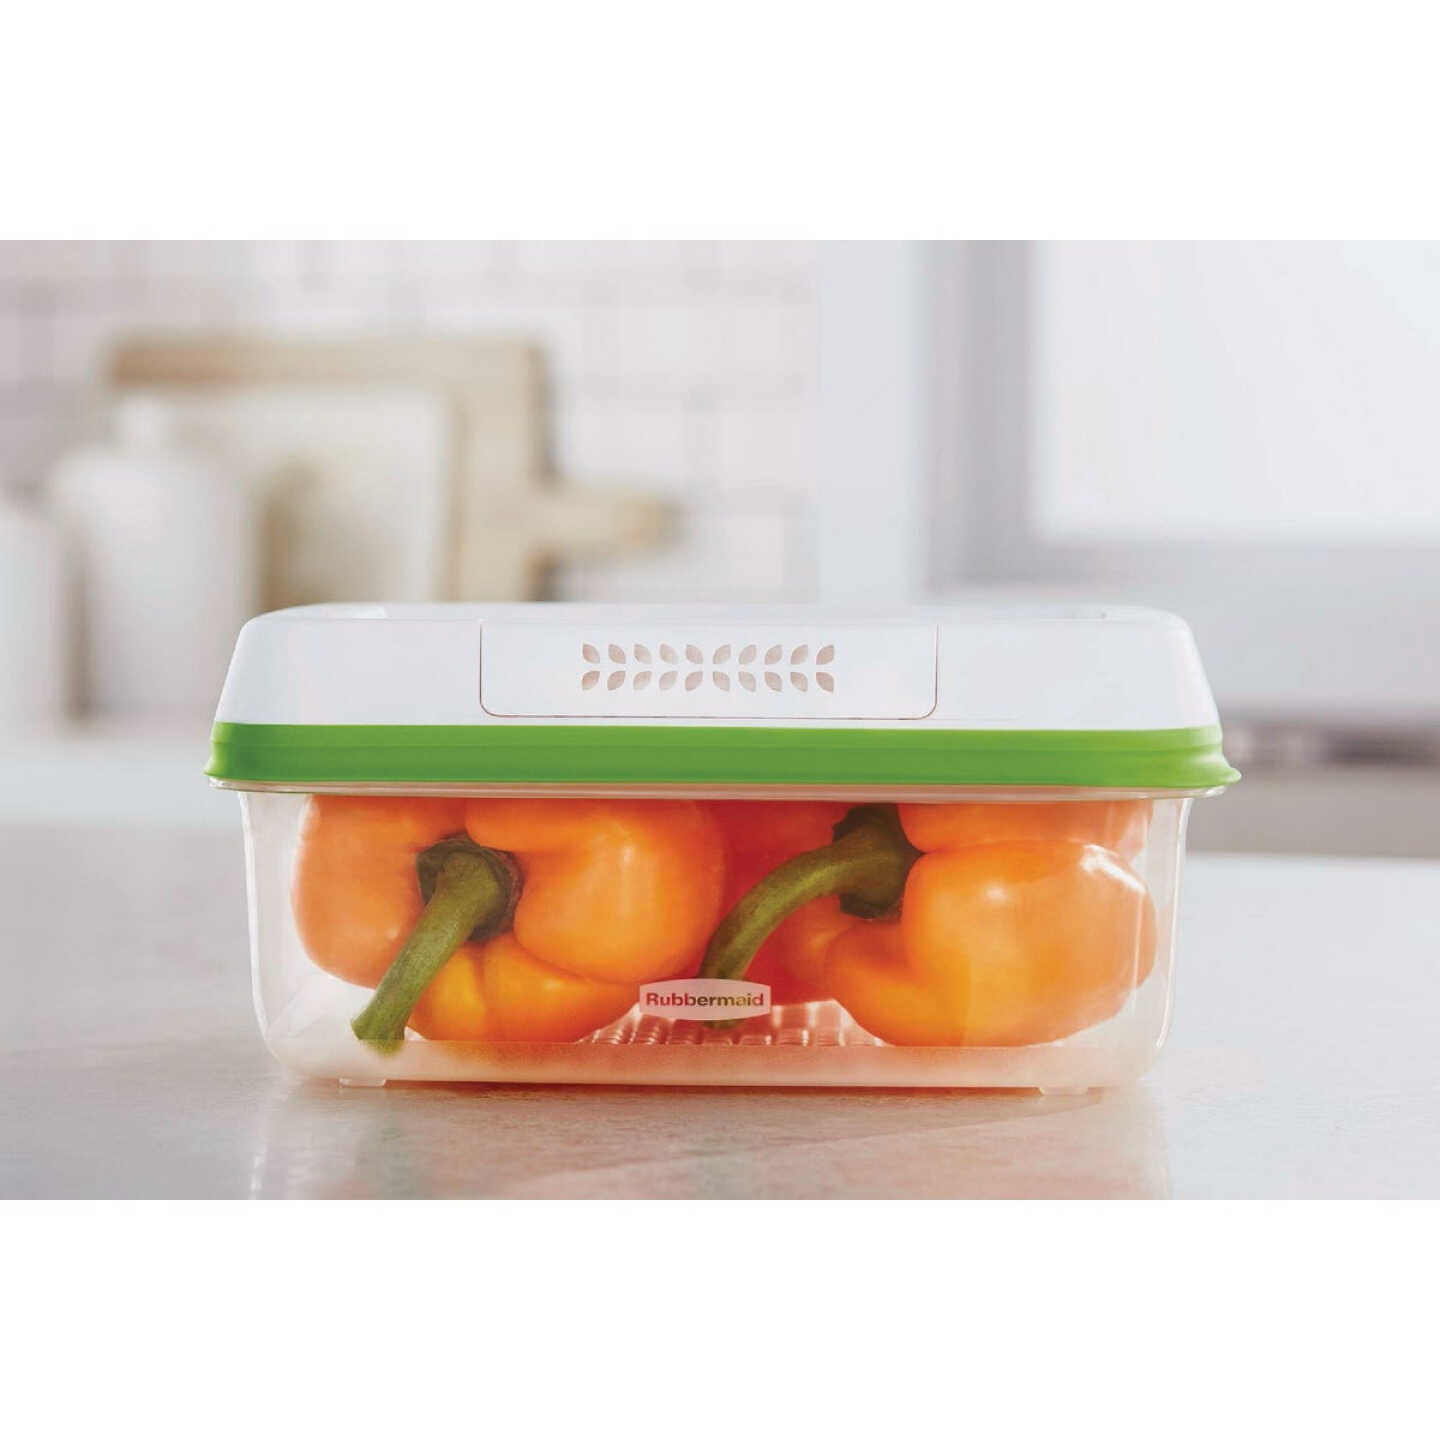 Rubbermaid Freshworks Produce Saver Container 6 Pc. Set, Food Storage, Household